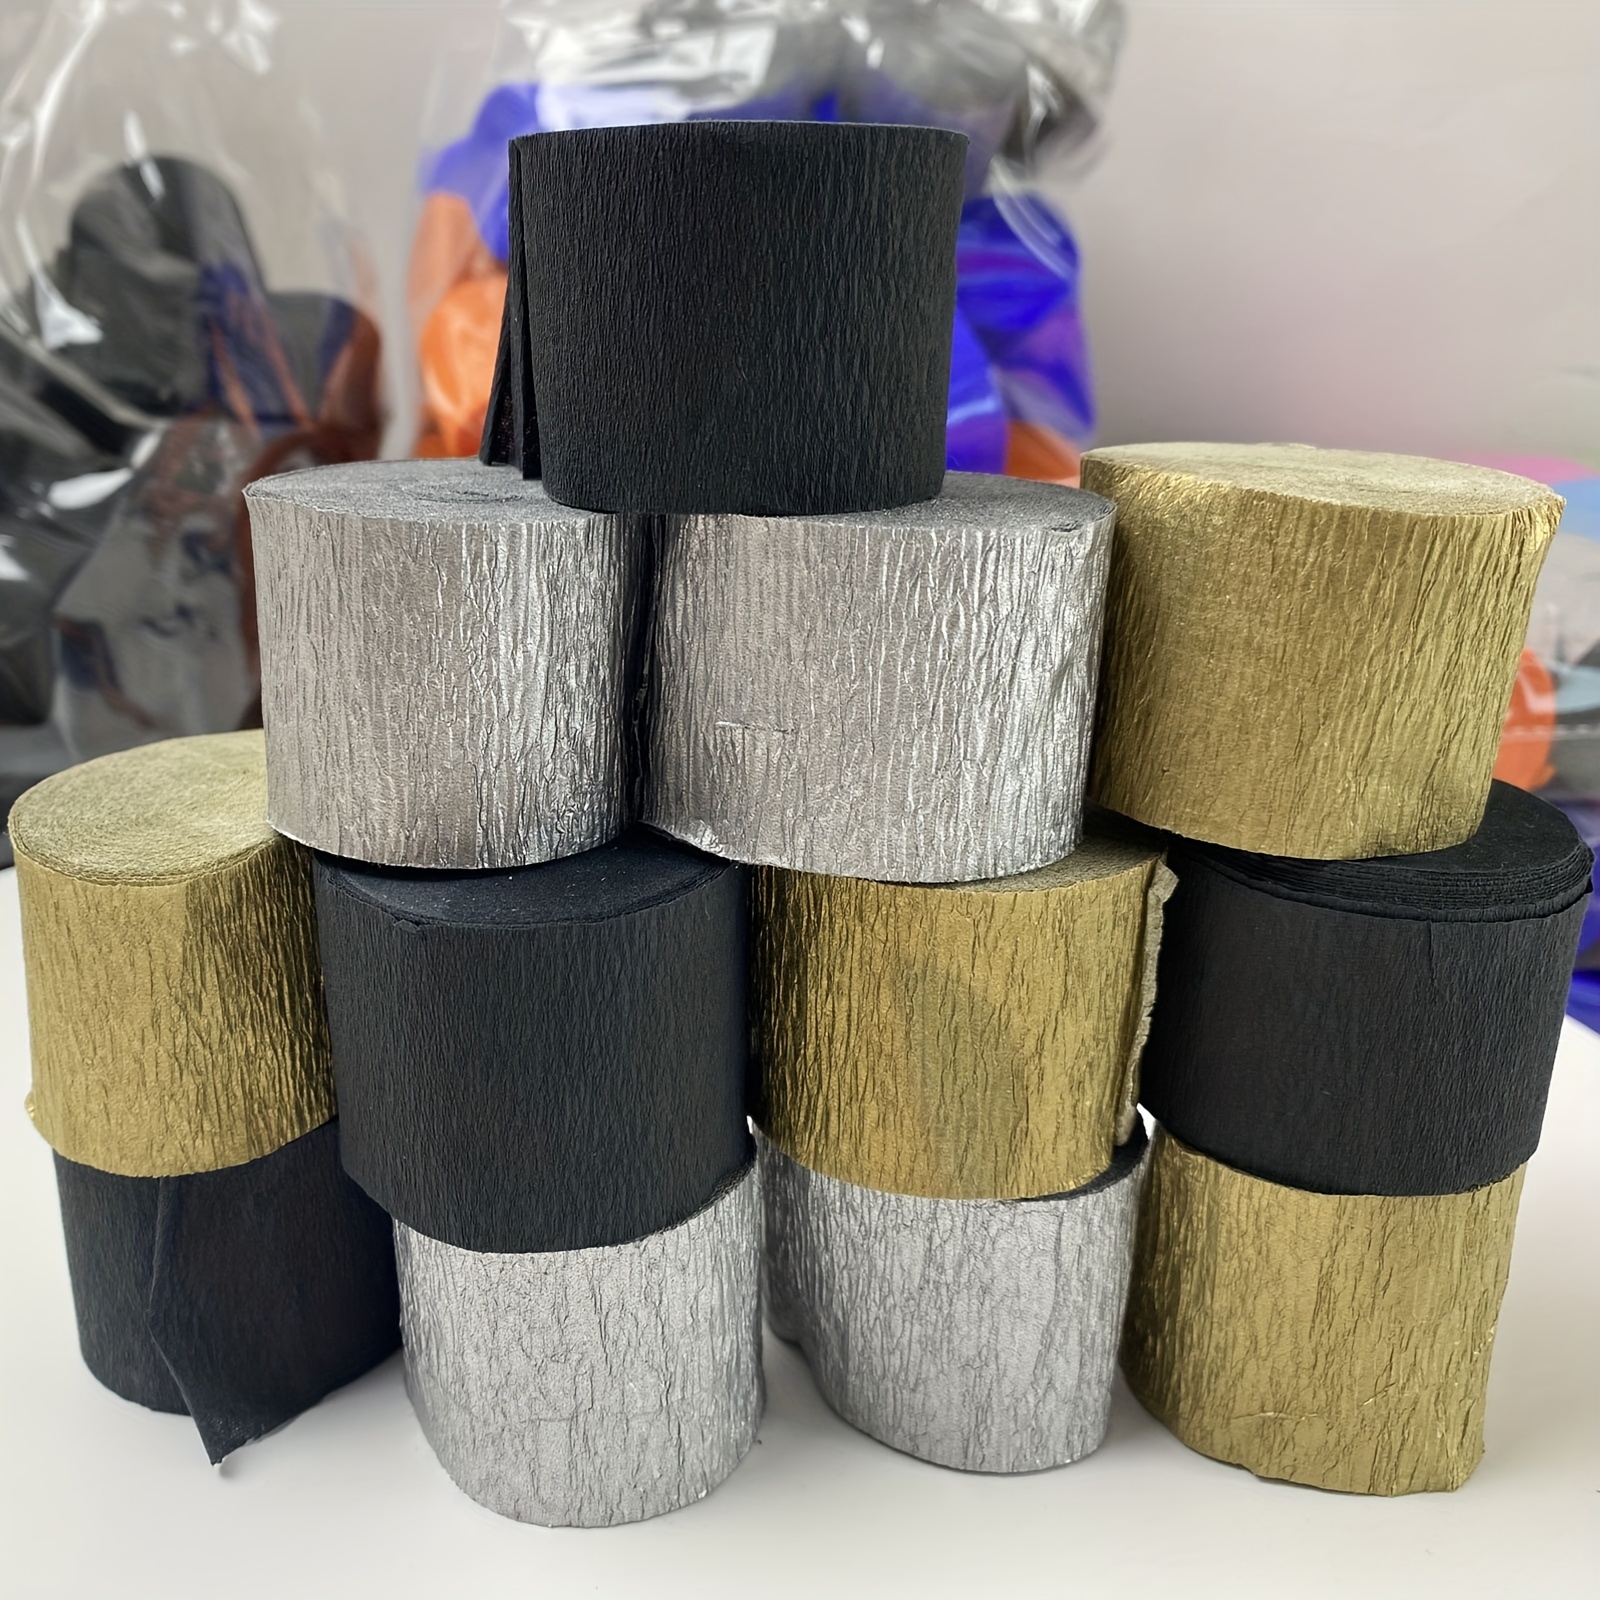 Sparkling Silver And Black Crepe Paper Streamers For Party